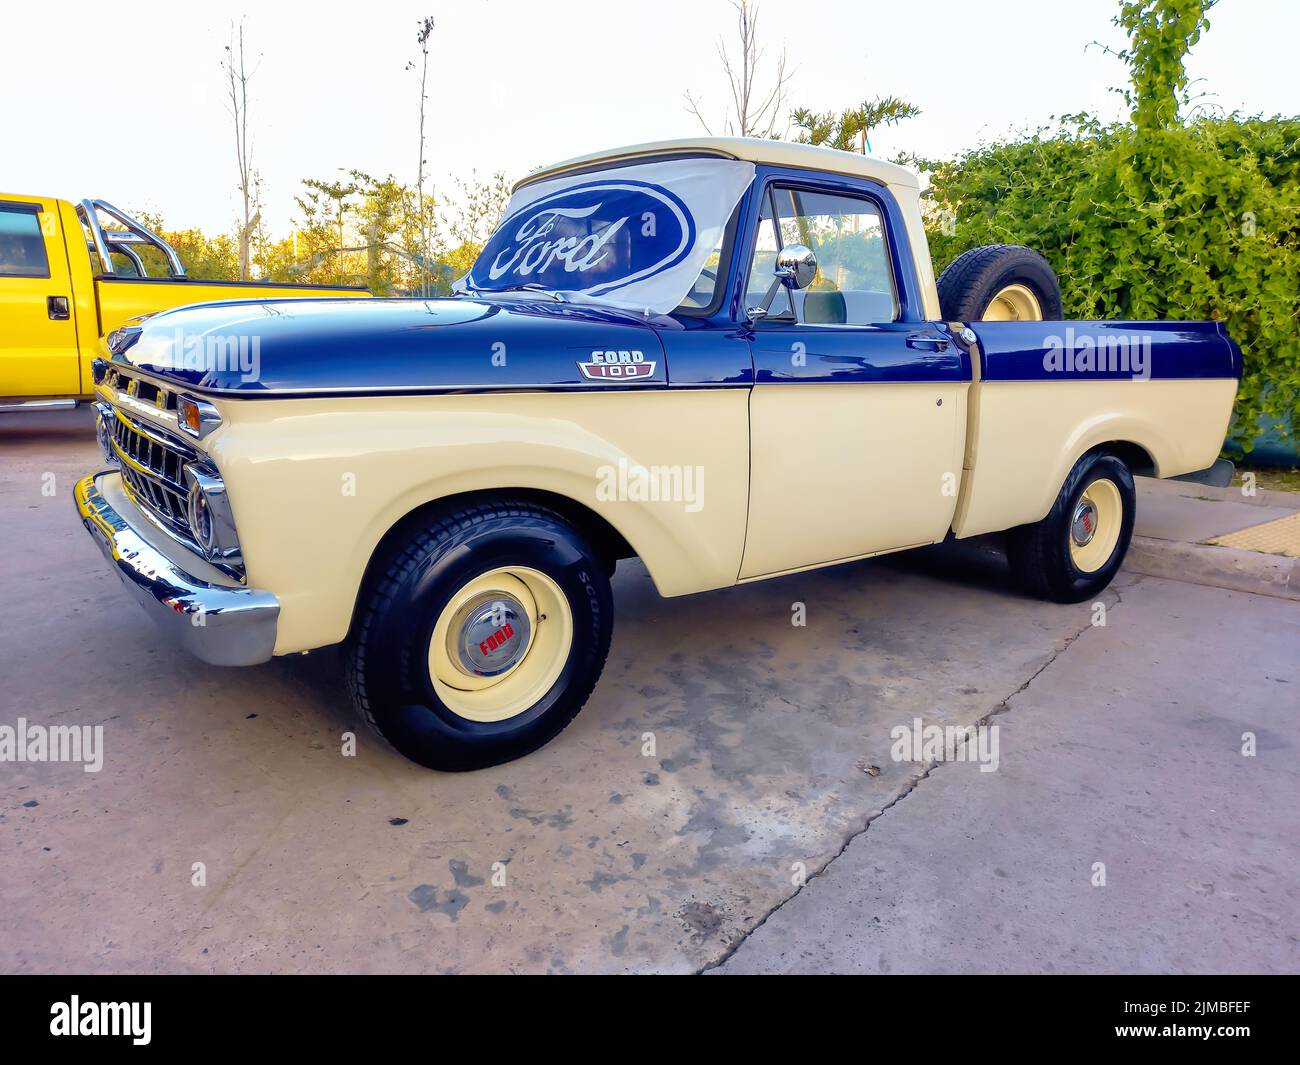 Ford blue oval logo and brand on the windshield of an old F100 V8 utility pickup truck 1963. Side view. Expo Fierro 2022 classic car show Stock Photo